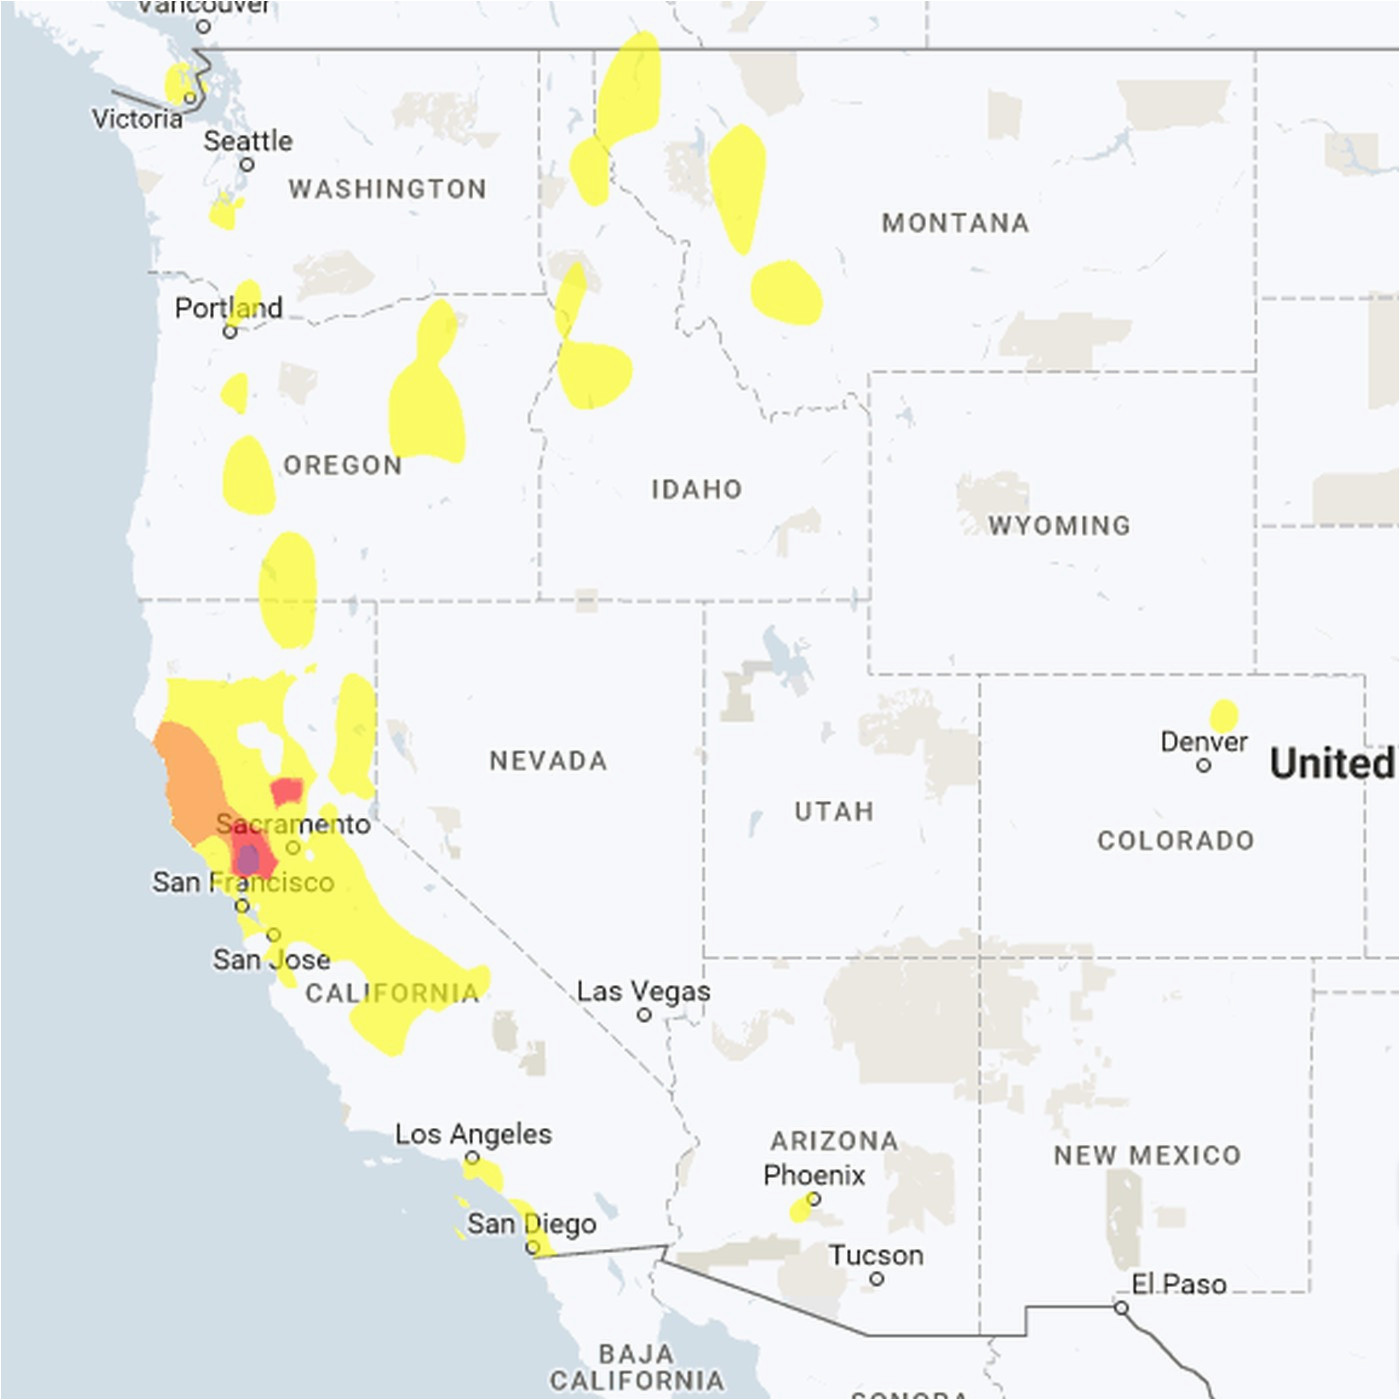 wildfire location map in us wildfire risk map inspirational